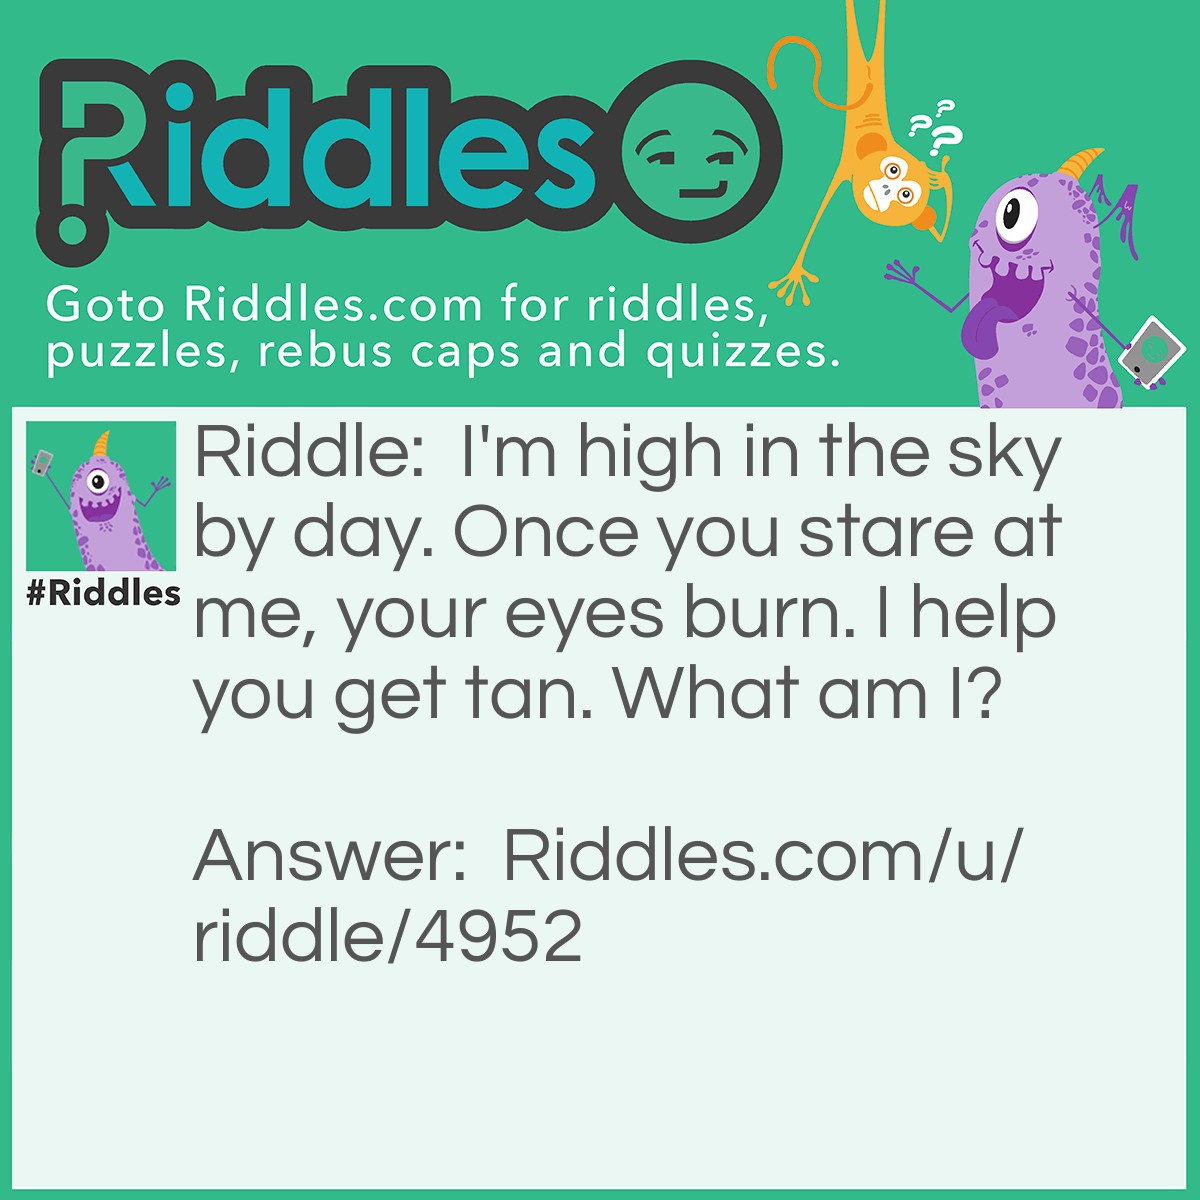 Riddle: I'm high in the sky by day. Once you stare at me, your eyes burn. I help you get tan. What am I? Answer: Sun